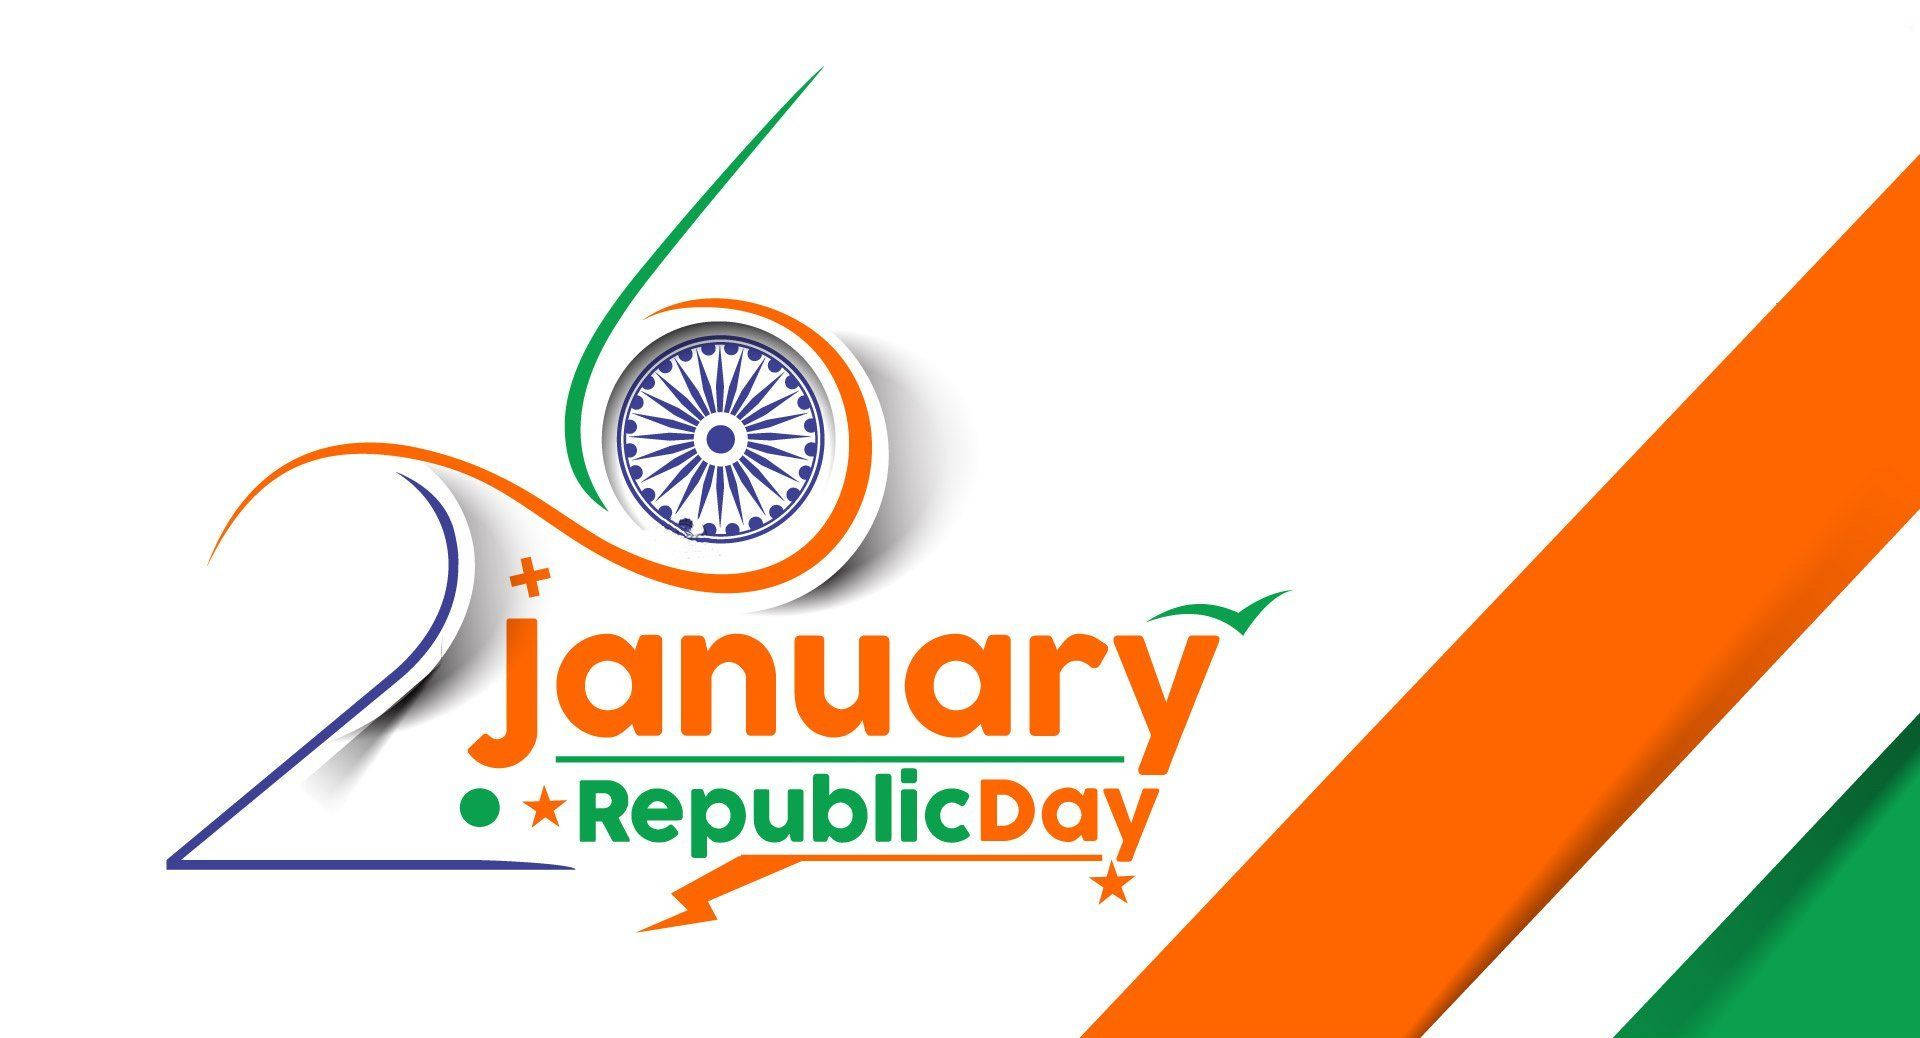 Simple India Republic Day 26 January Poster Design